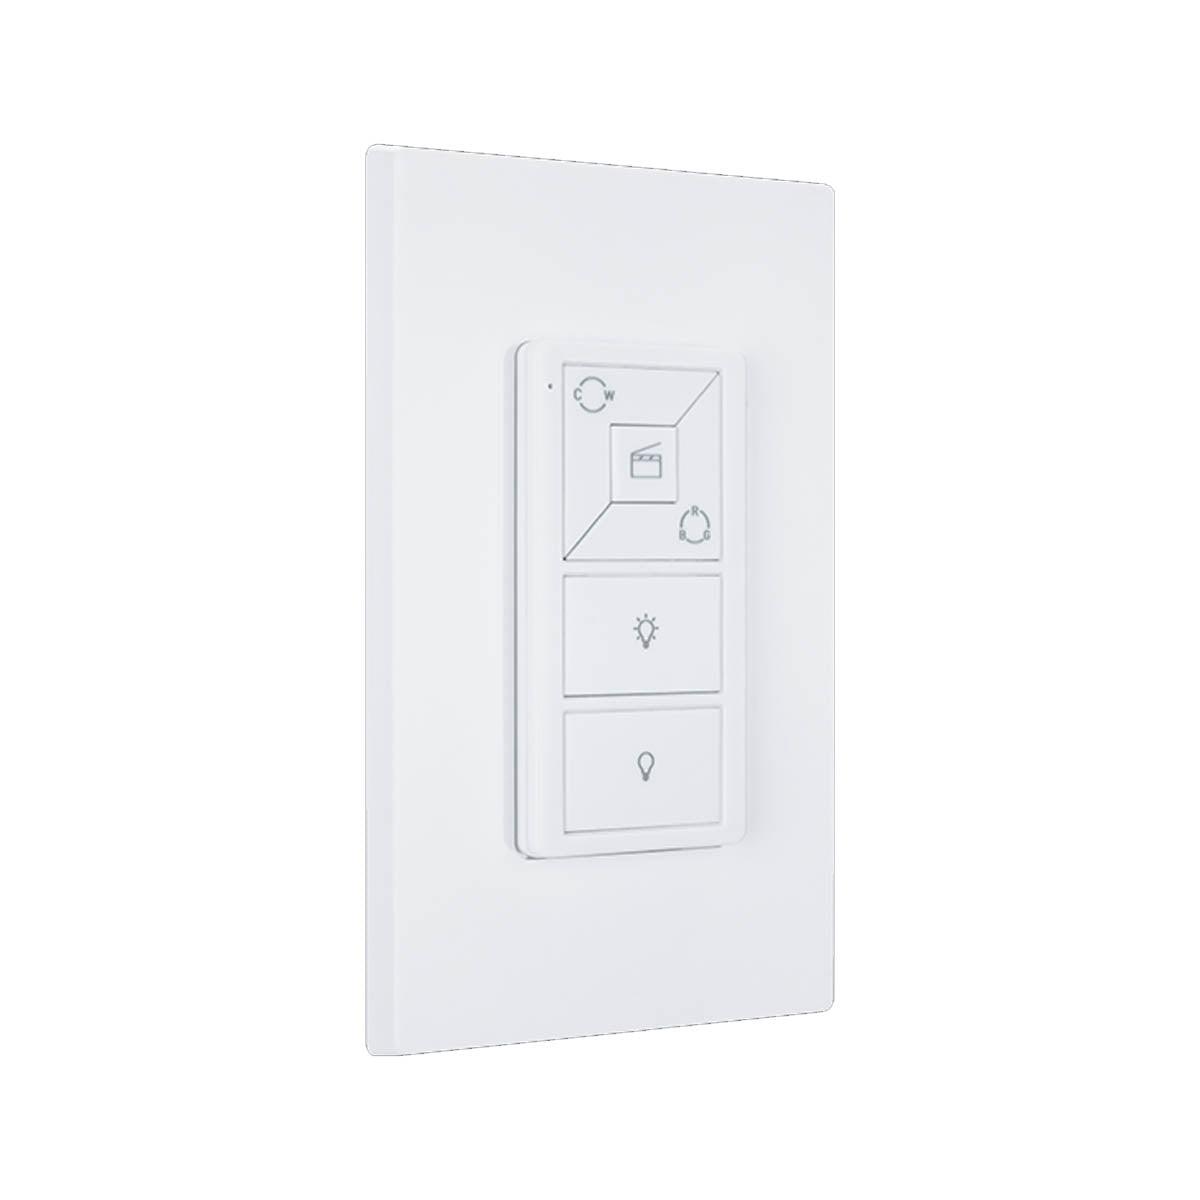 Spektrum Wireless Smart Switch Controller (Wall-plate Not Included) - Bees Lighting